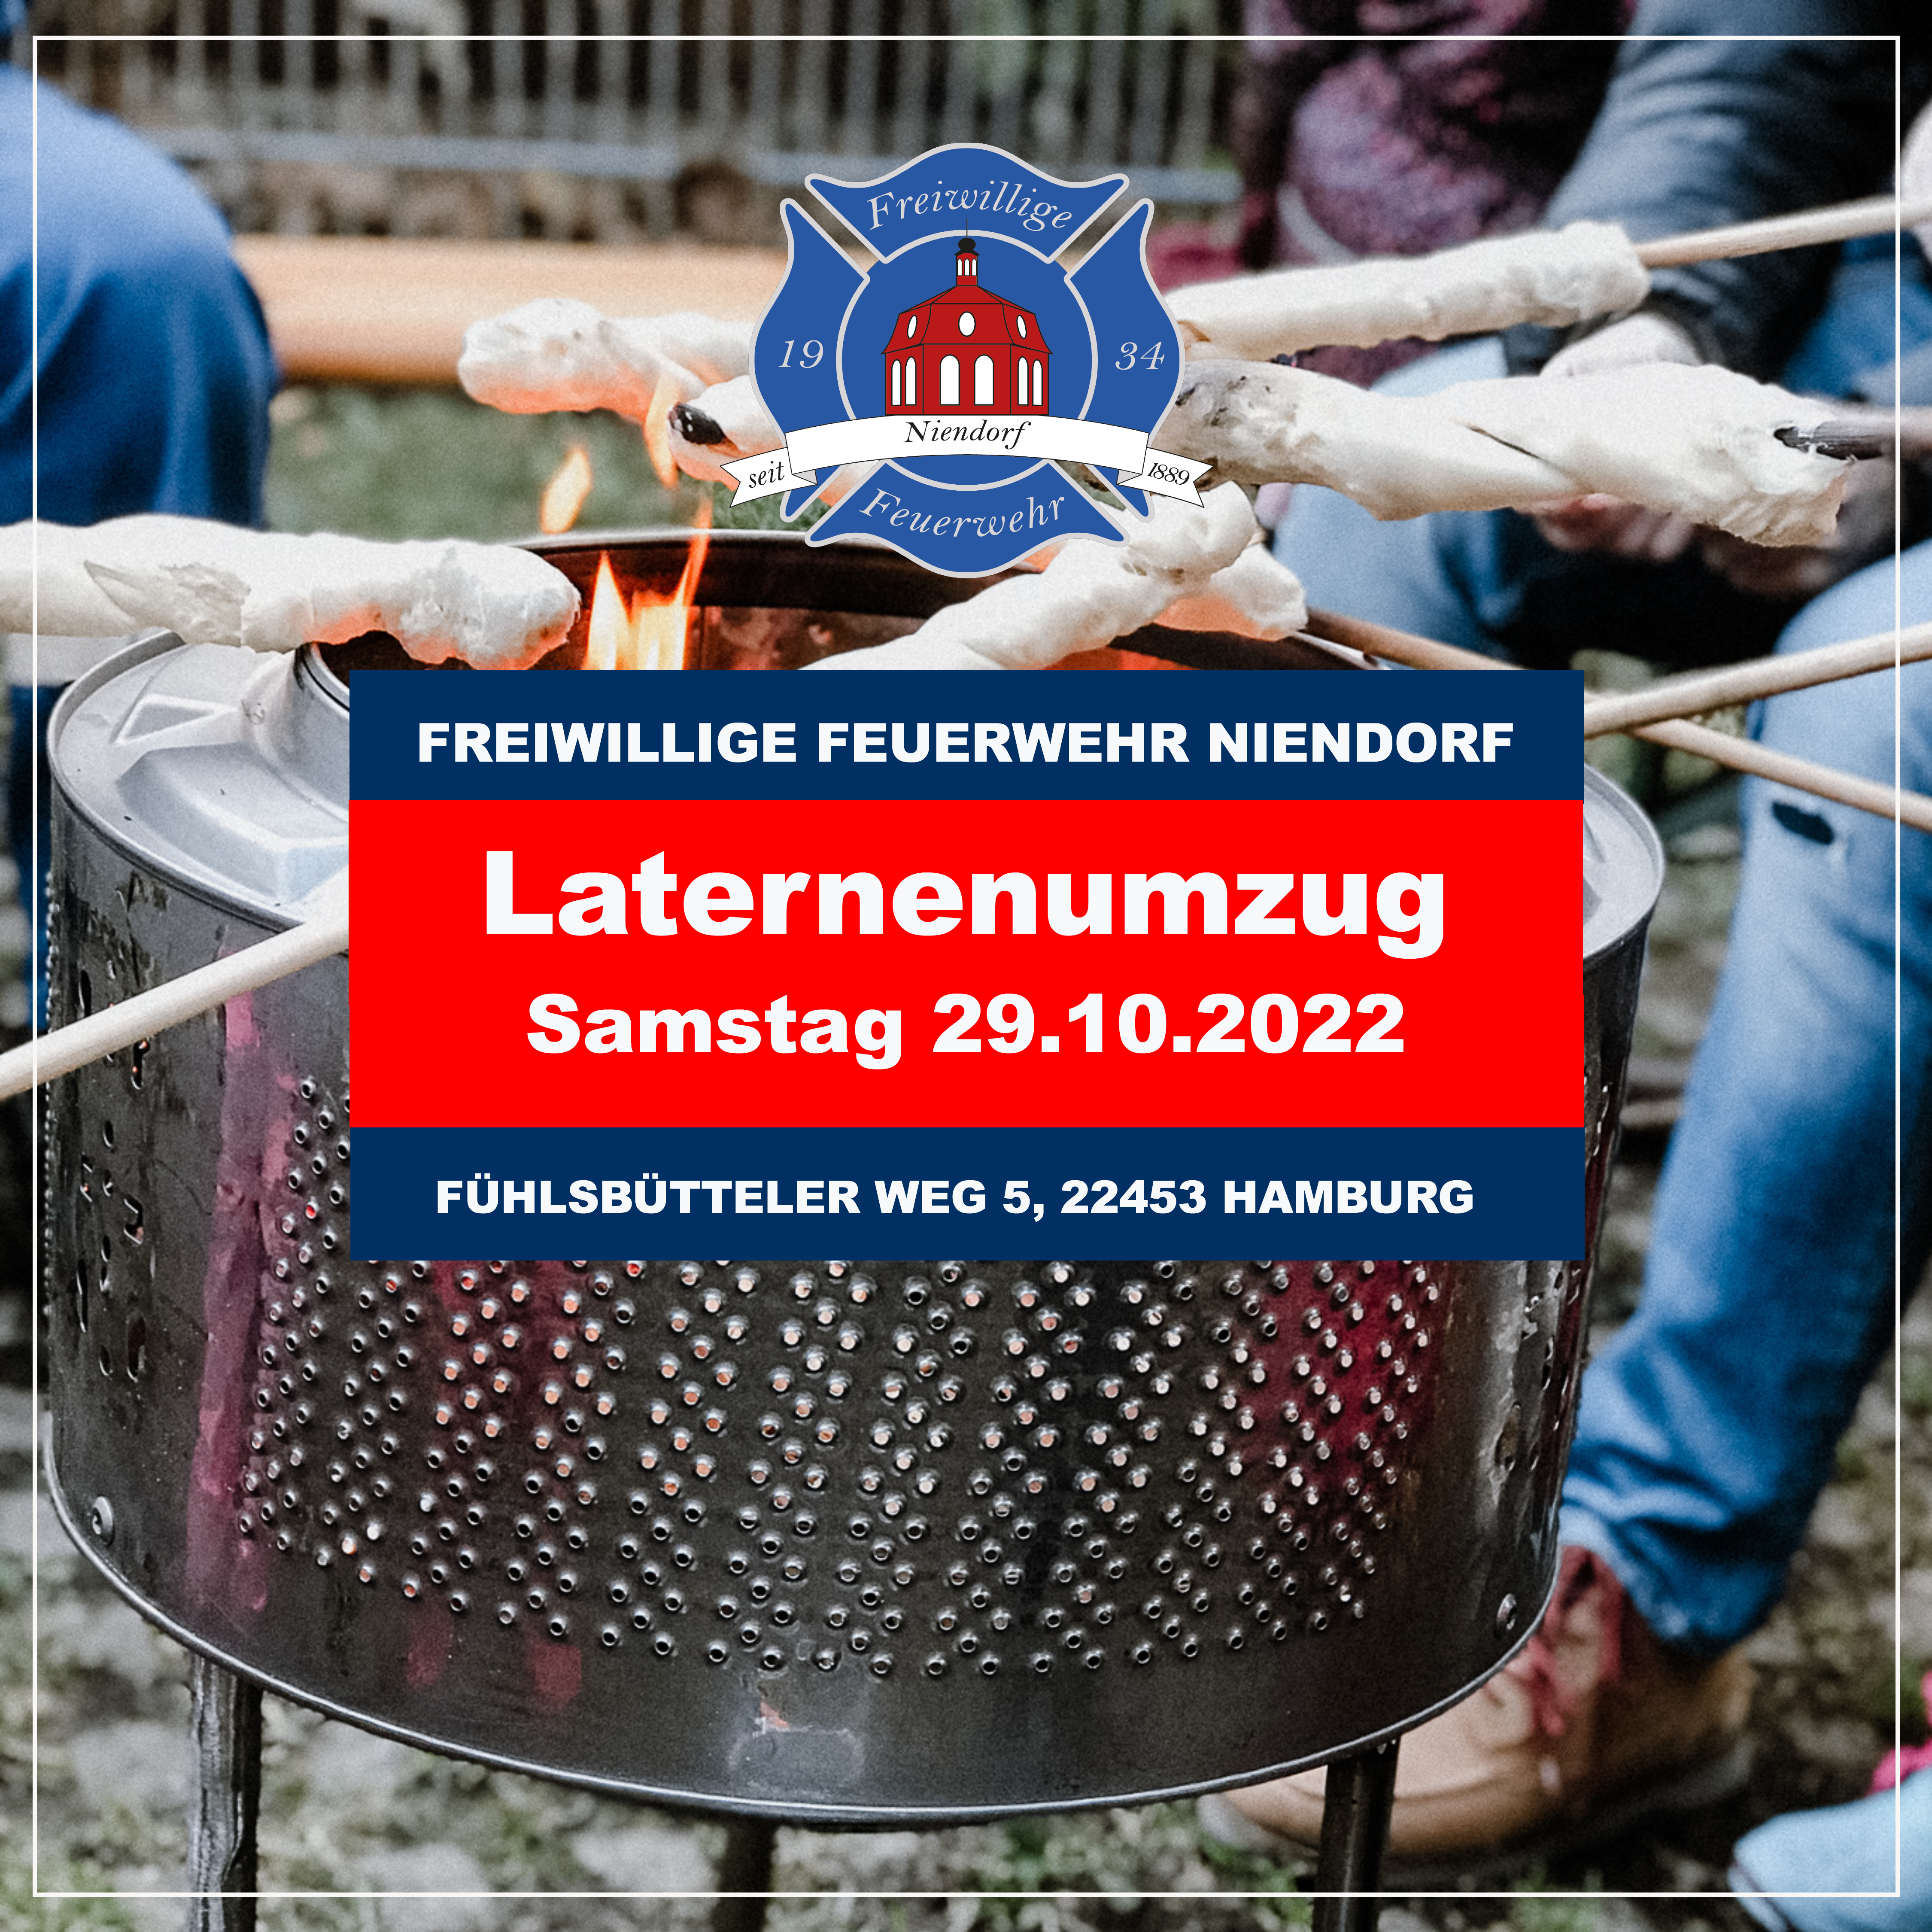 Laternenfest 2022